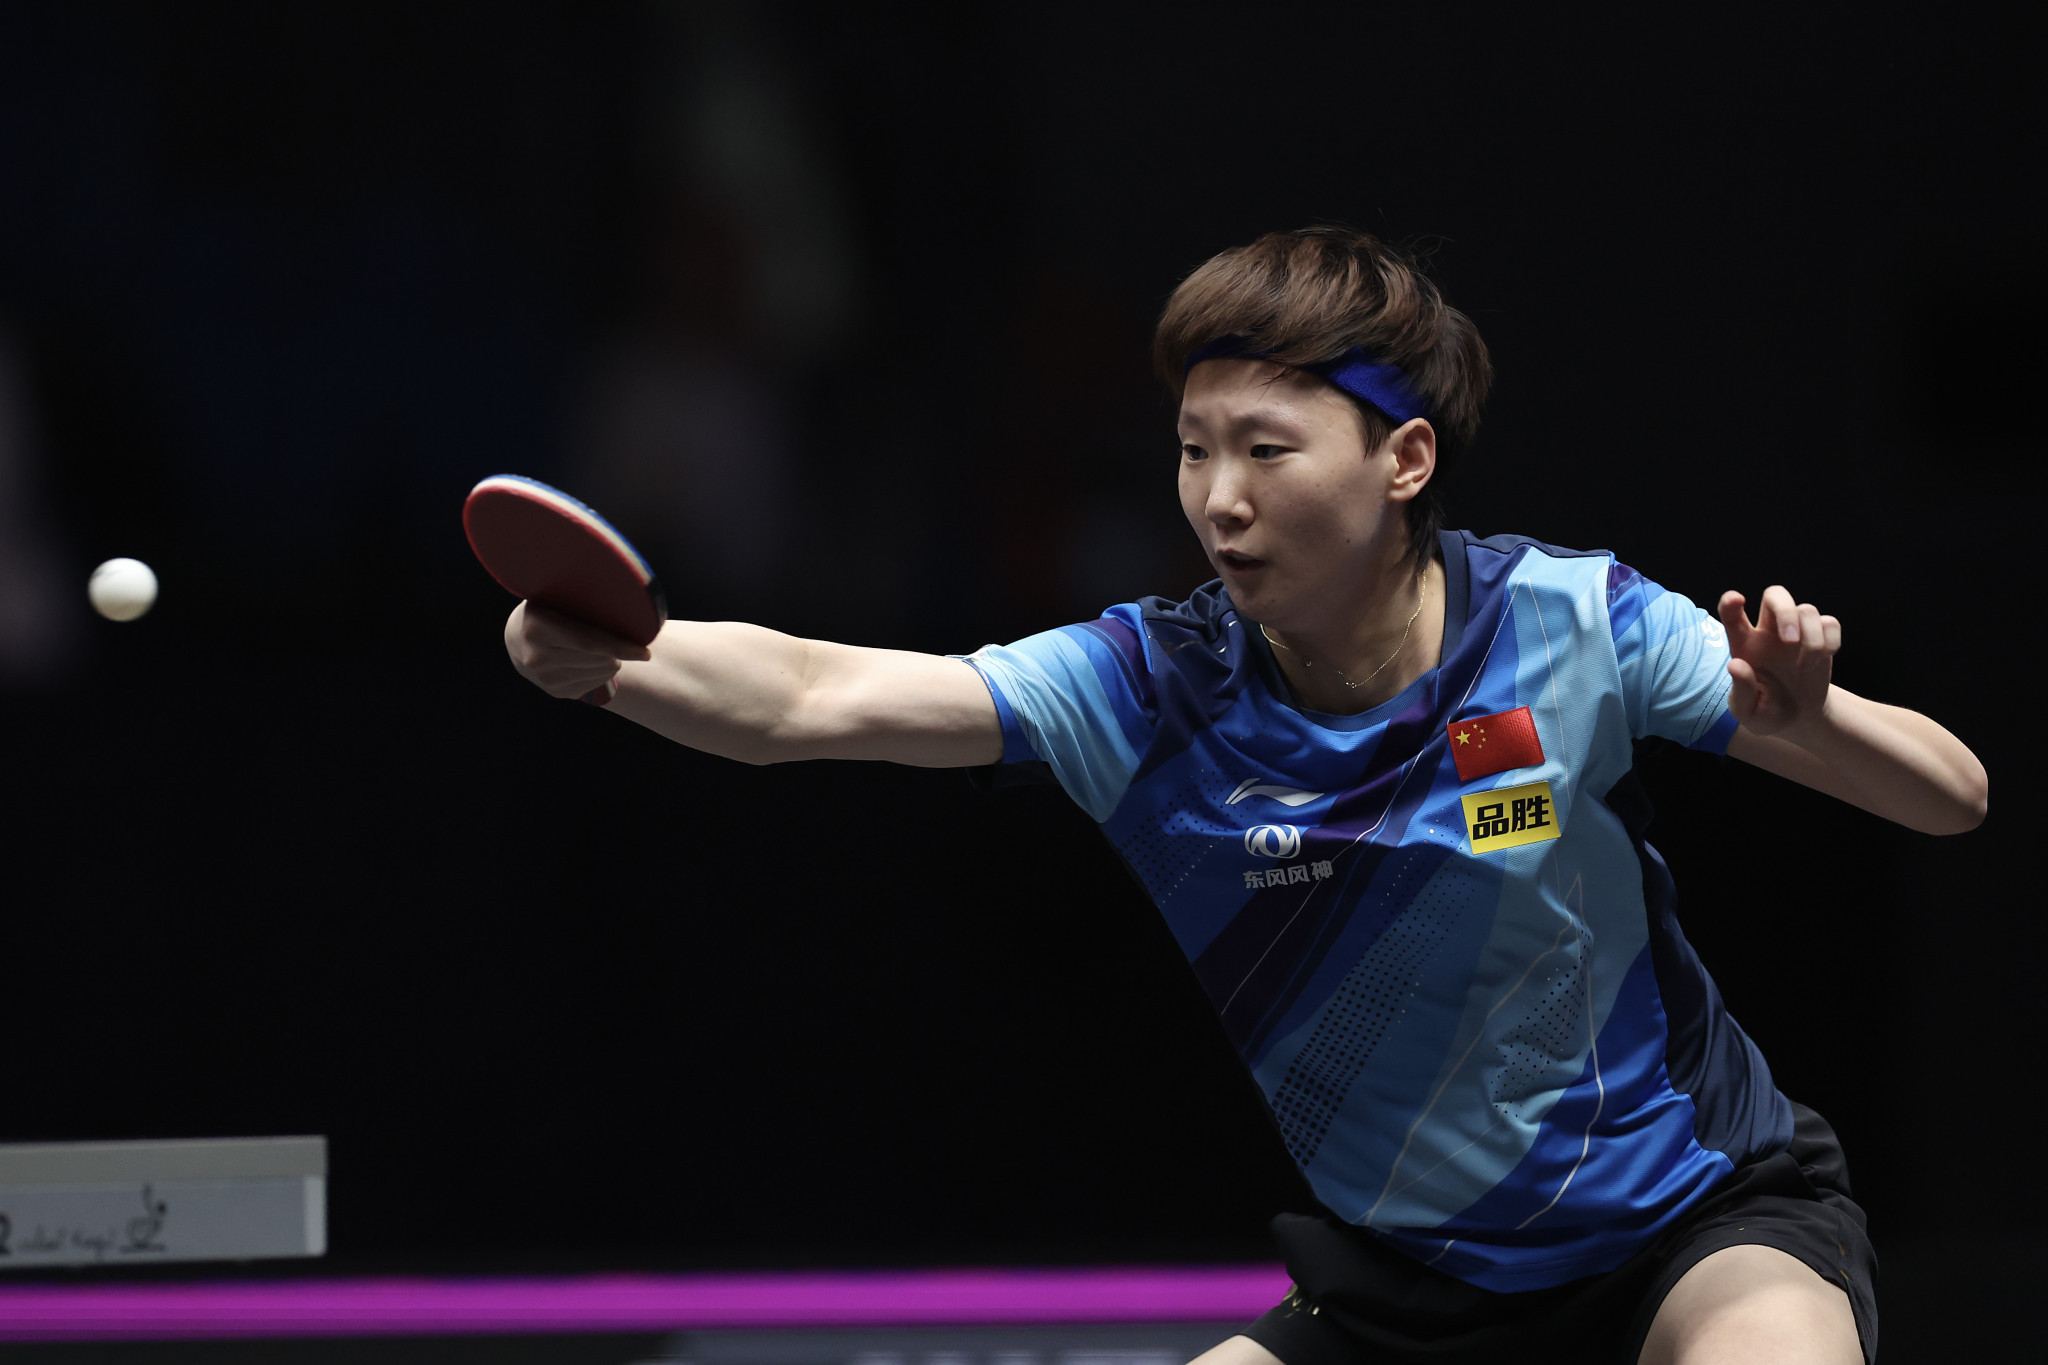 Chinese second seed Wang Manyu was pushed all the way by Hanna Haponova at the World Table Tennis Championships Finals in Durban ©Getty Images